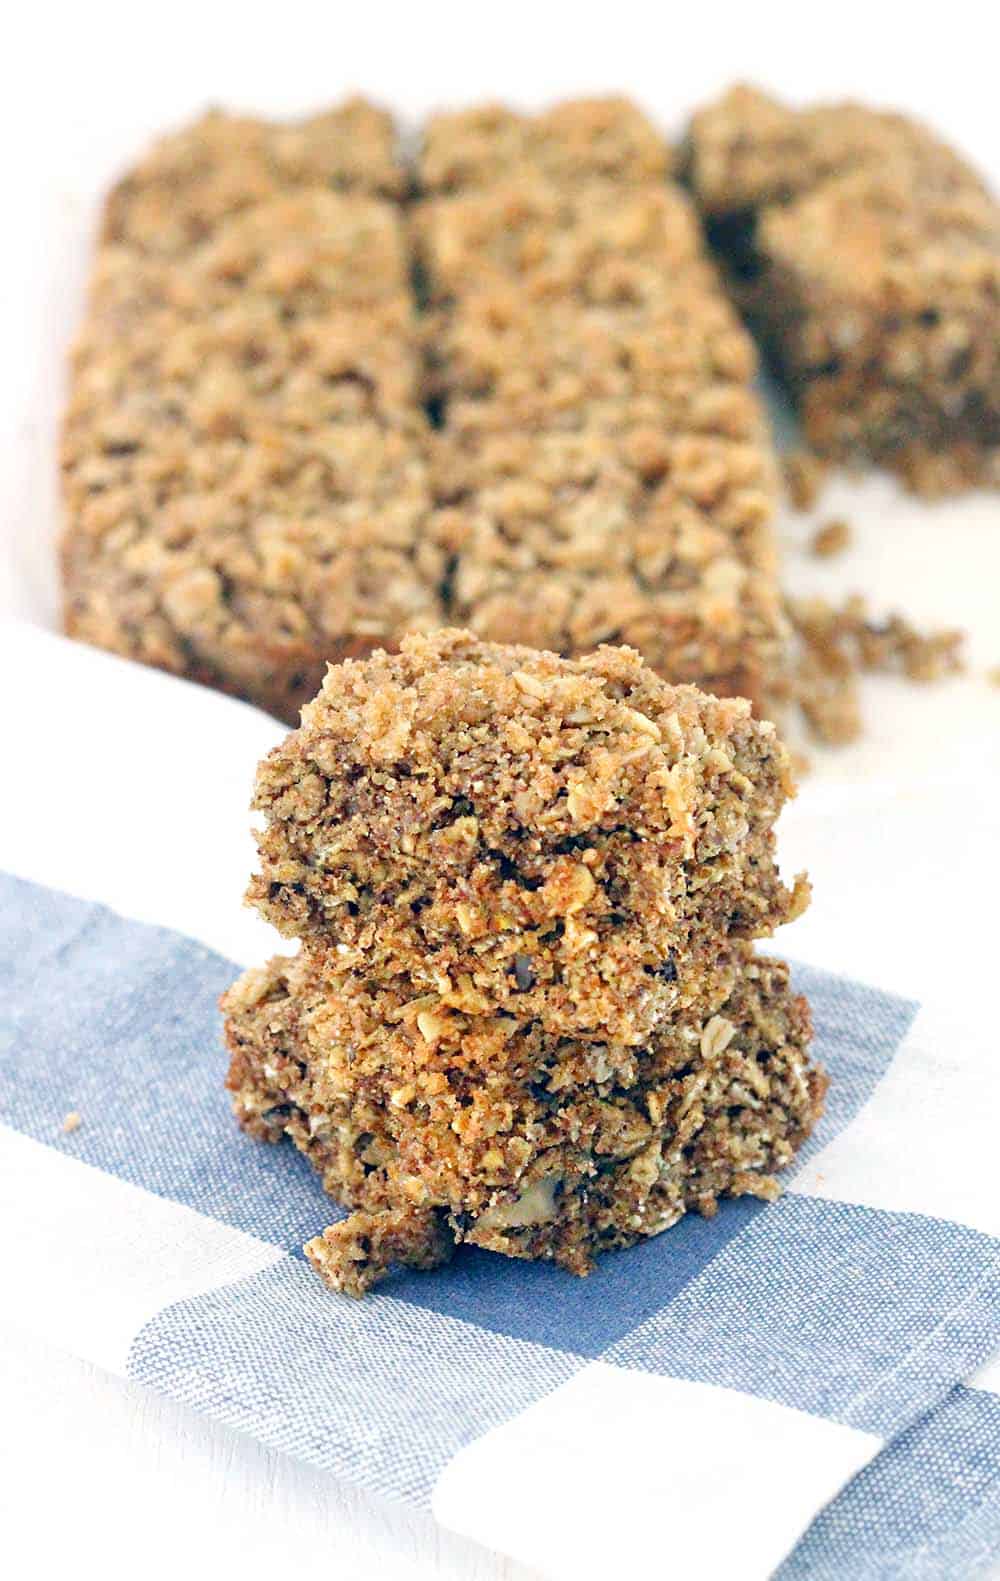 These Maple and Brown Sugar Oatmeal Squares are made with 100% whole grains. A healthy breakfast recipe- they're full of fiber and will keep you satisfied all morning. The perfect grab and go for busy mornings, or to pack in your bag for a long hike.